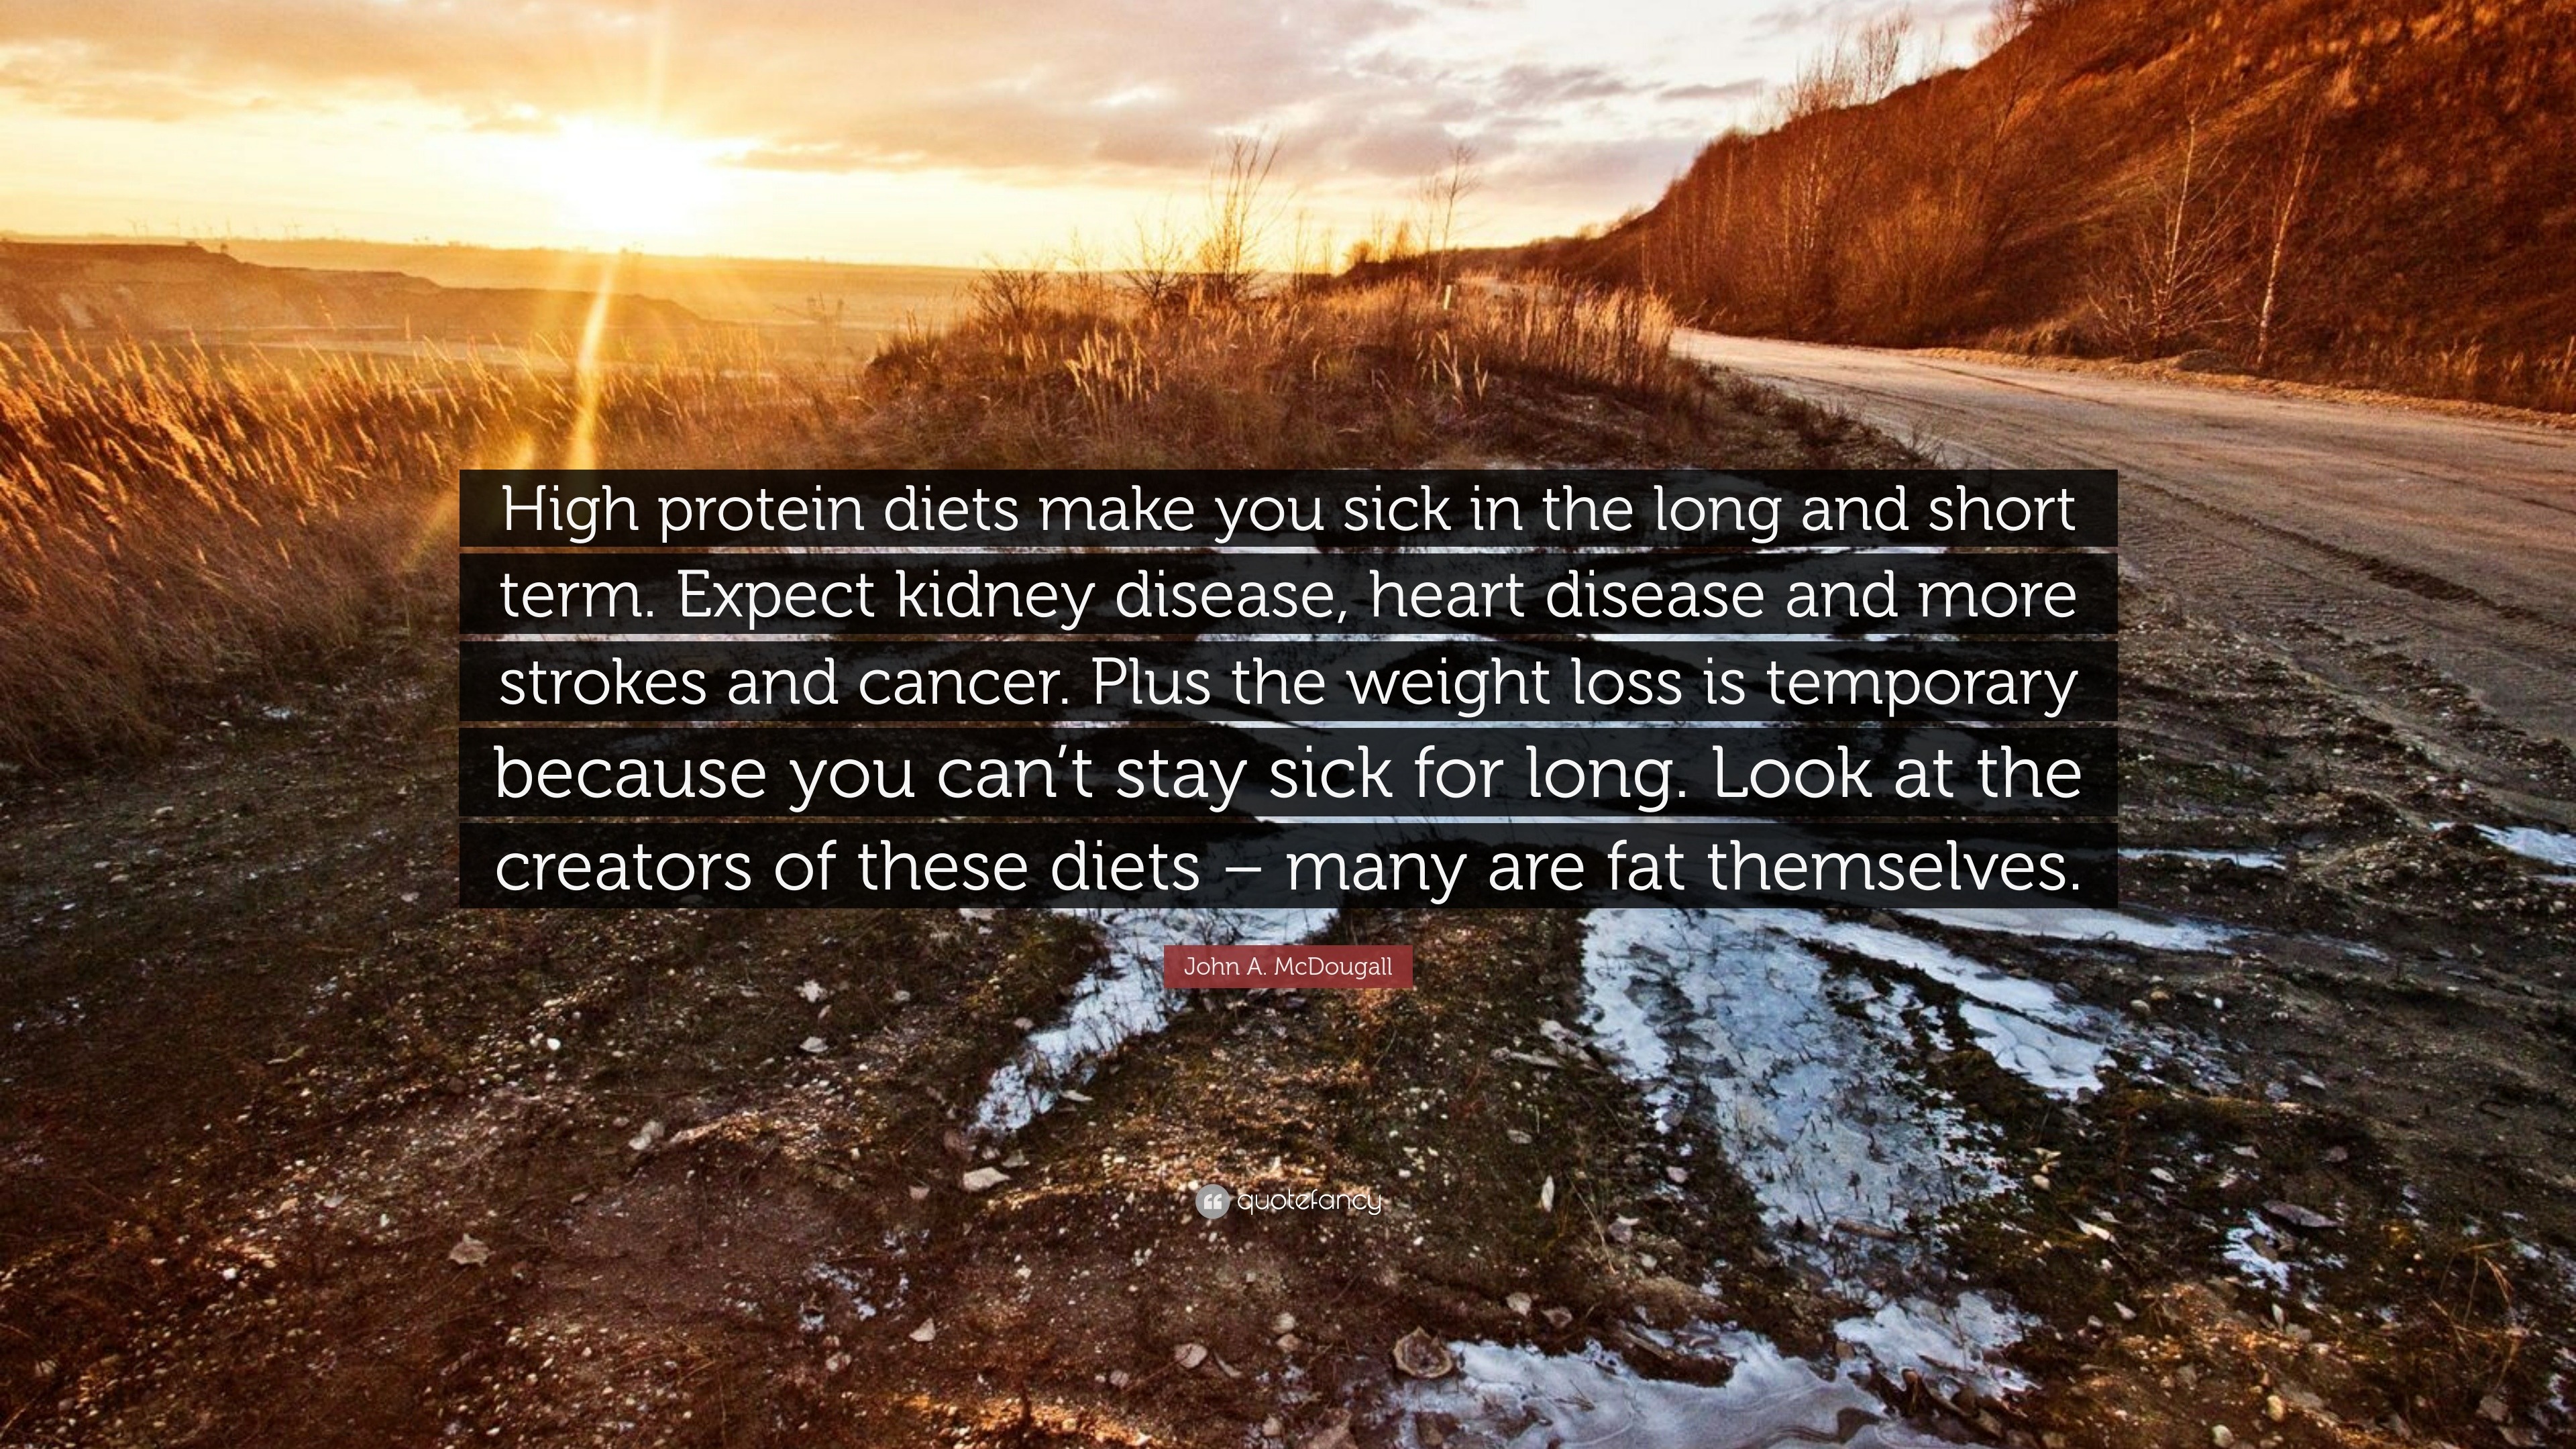 John A. McDougall Quote: “High protein diets make you sick in the long and  short term. Expect kidney disease, heart disease and more strokes and c...”